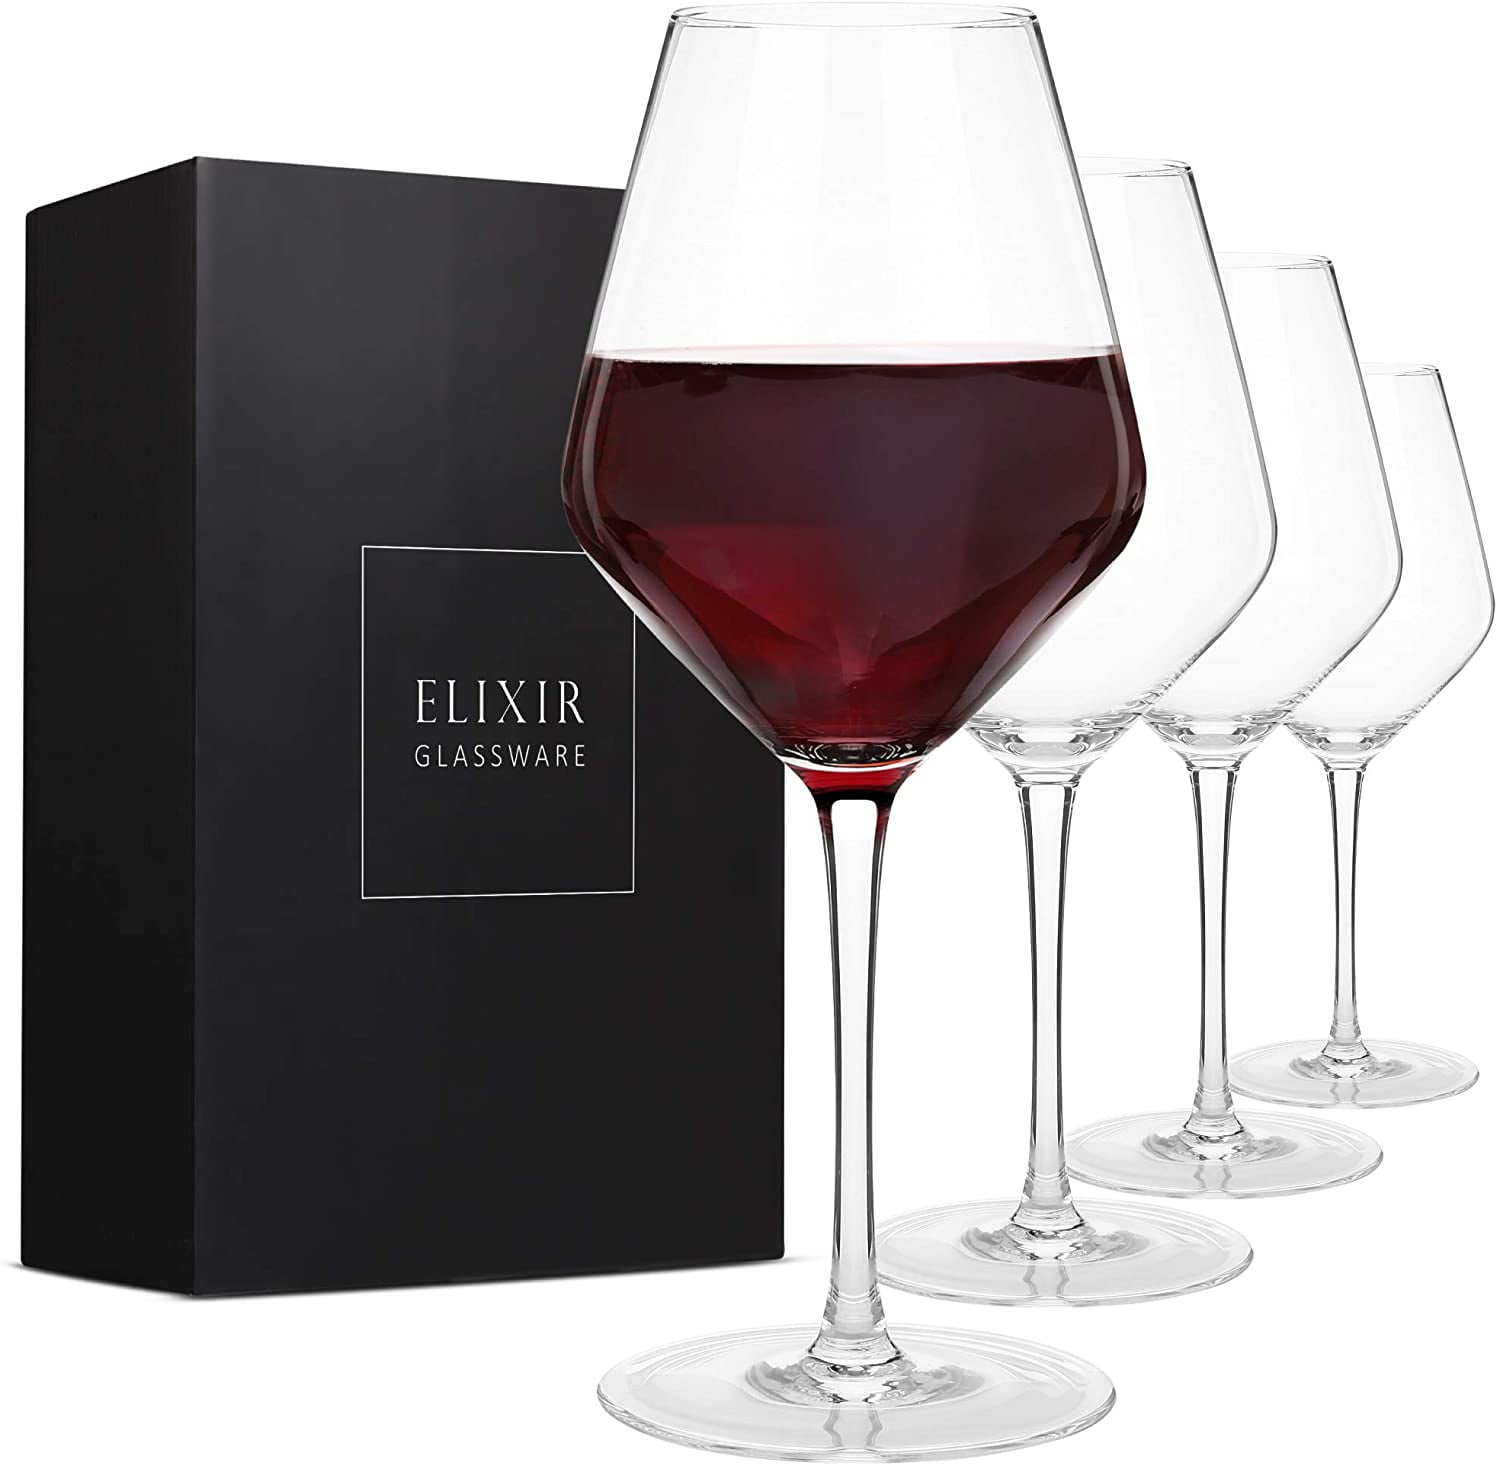 Vikko Décor Silver Ombre Red Wine Glasses | Thin, Handblown Glass – Tall,  Elegant Stem – Dishwasher Safe – 21 Ounce Cup – Great Gift Idea – Set of 8